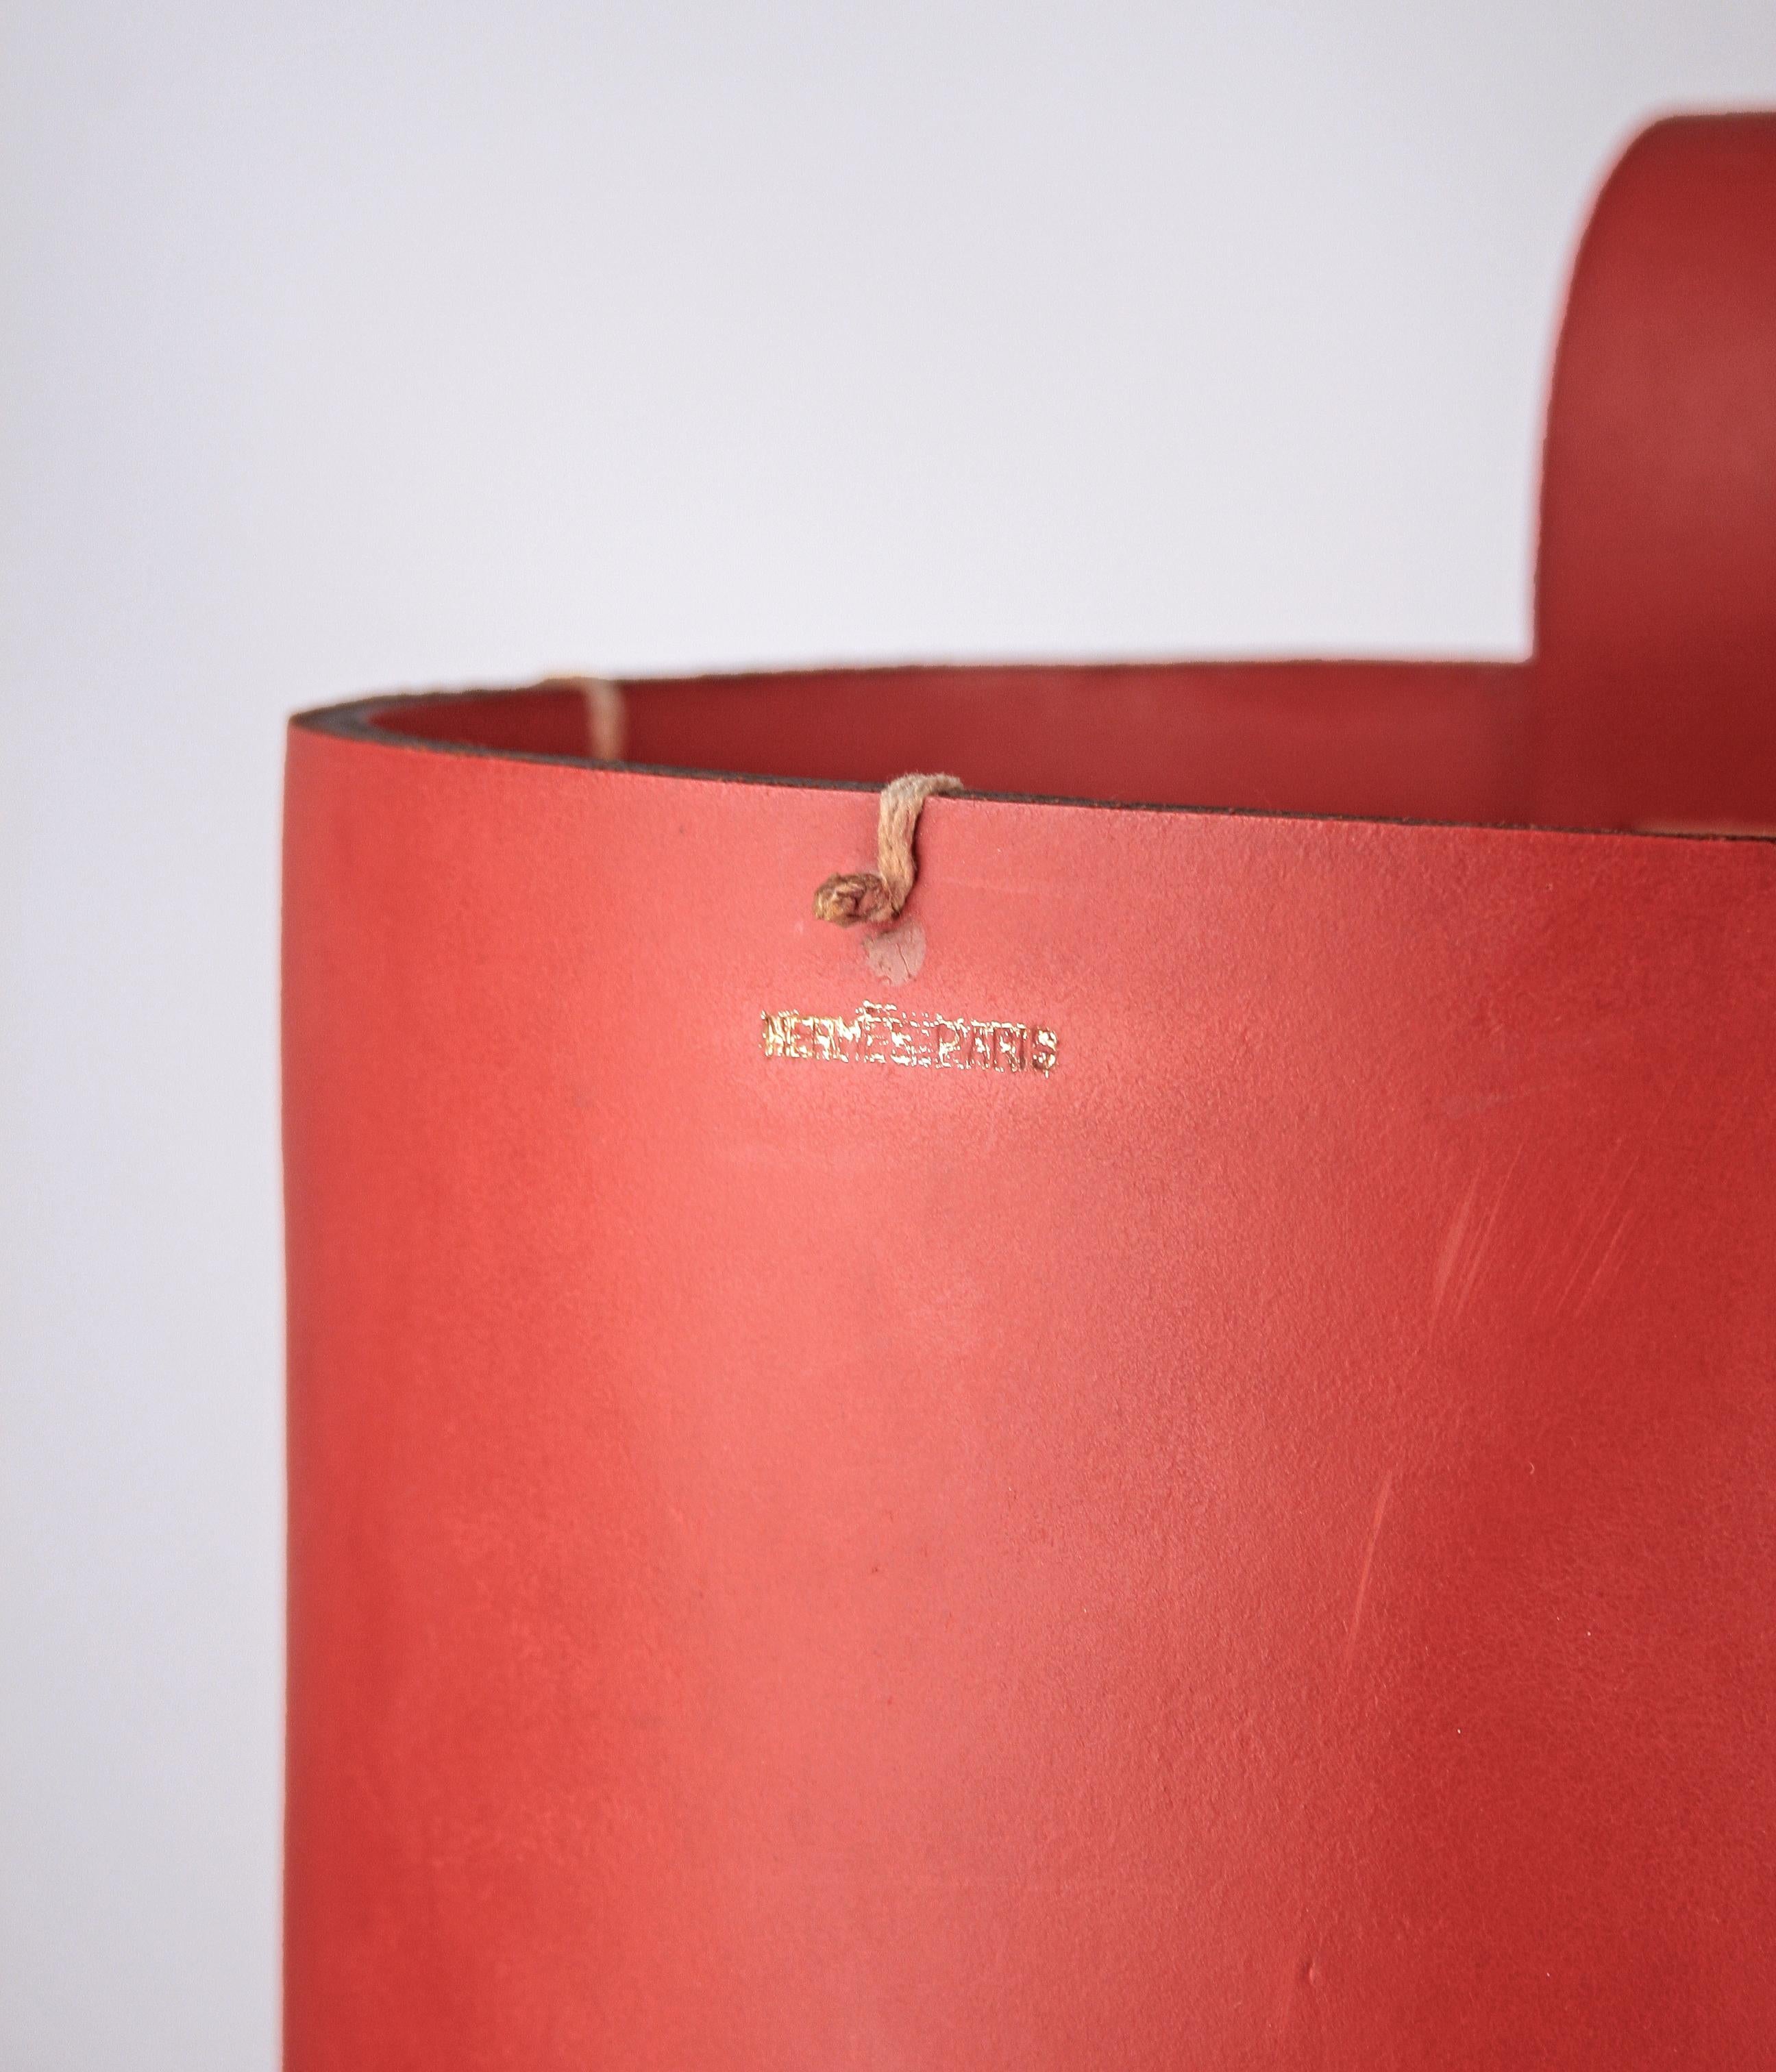 Mid-20th C. Modern French Red Leather Cylindrical Umbrella Stand by Hermès Paris For Sale 2